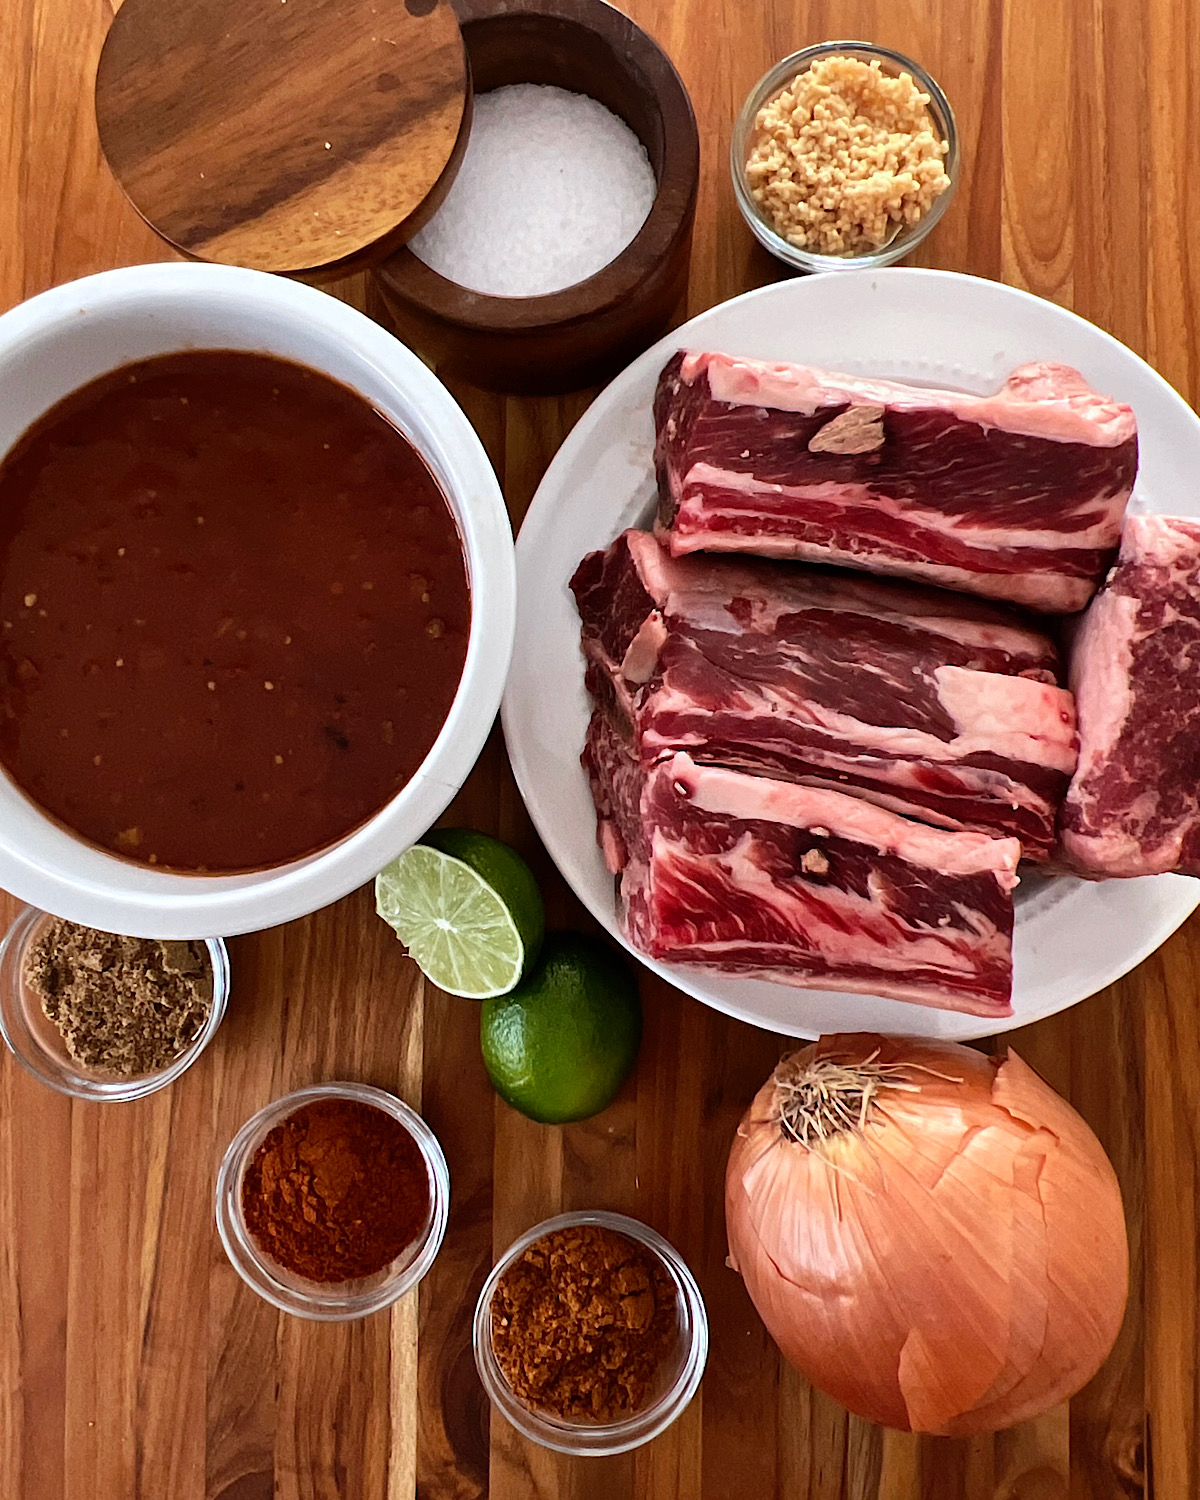 Ingredients for Mexican Braised Short Ribs recipe.